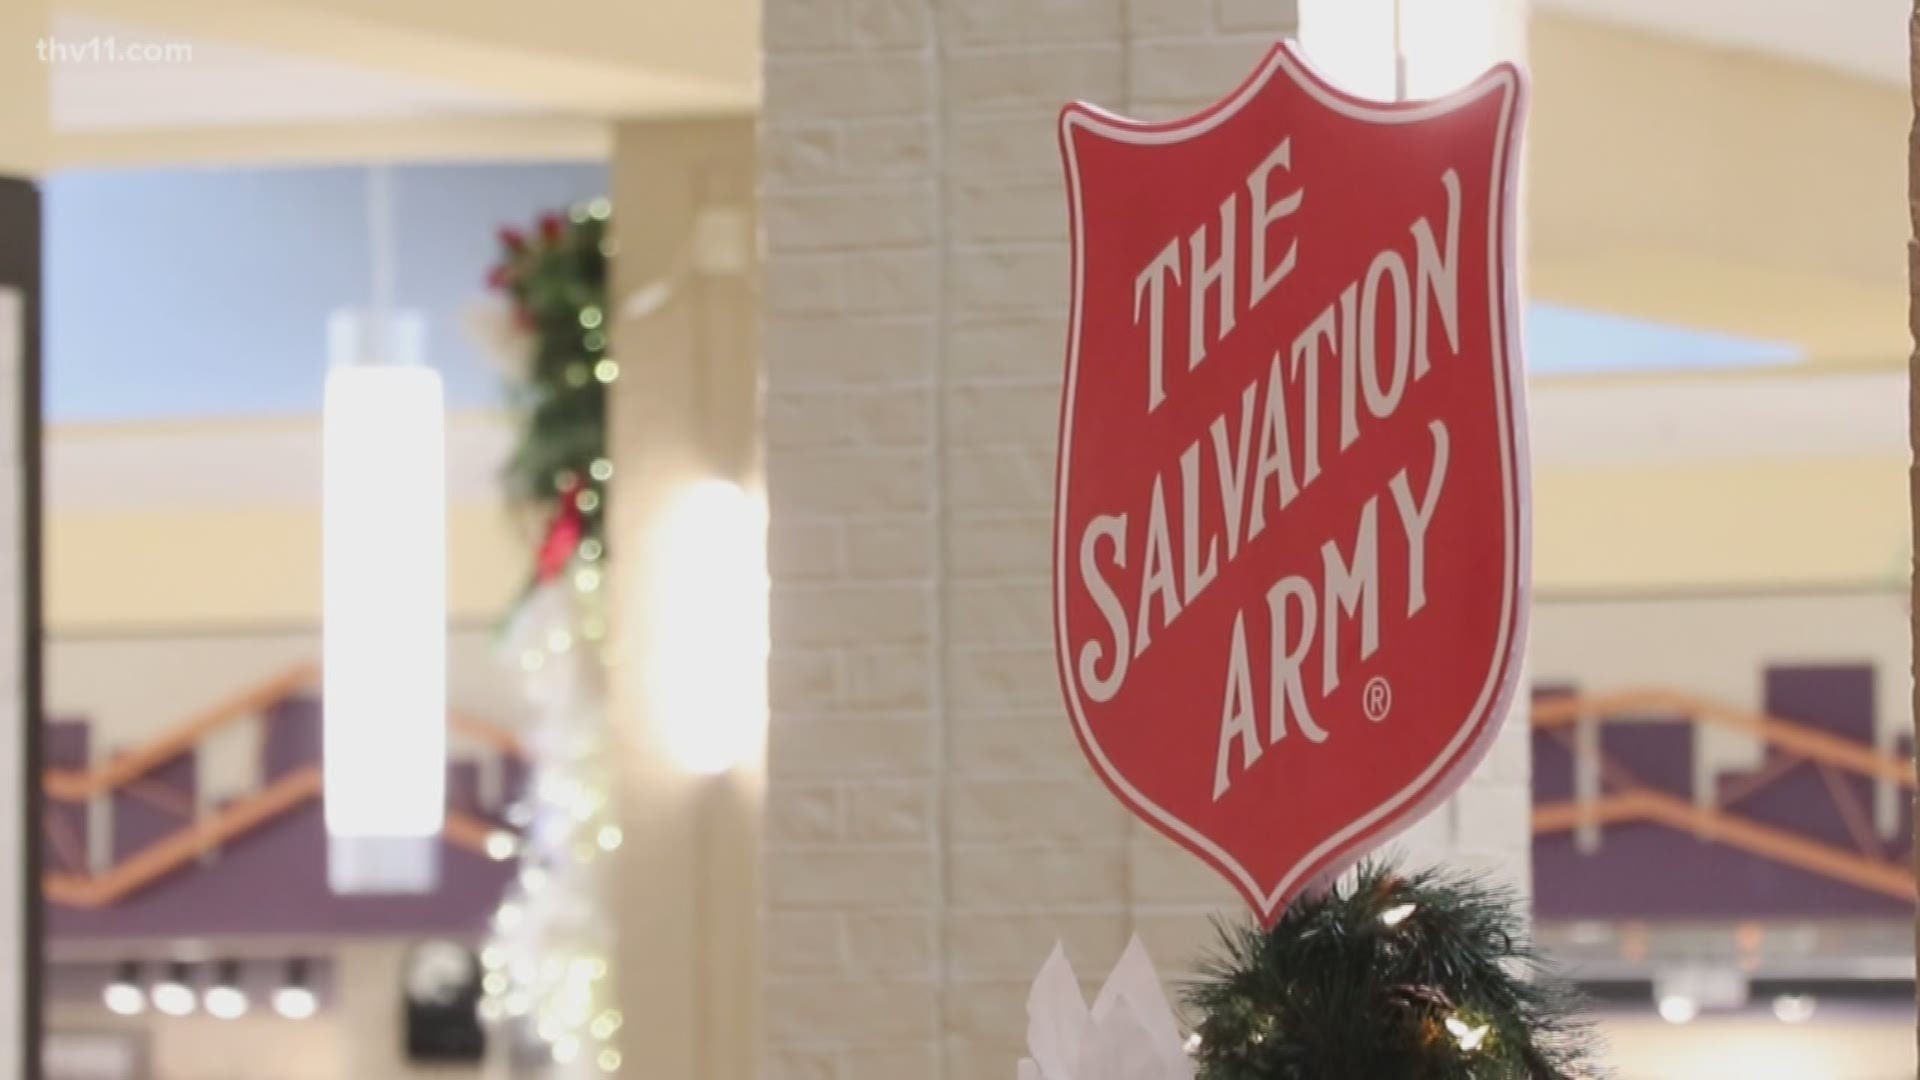 If you're ready to spread the Christmas spirit, today's your first chance to choose a child from the Salvation Army Angel Tree.